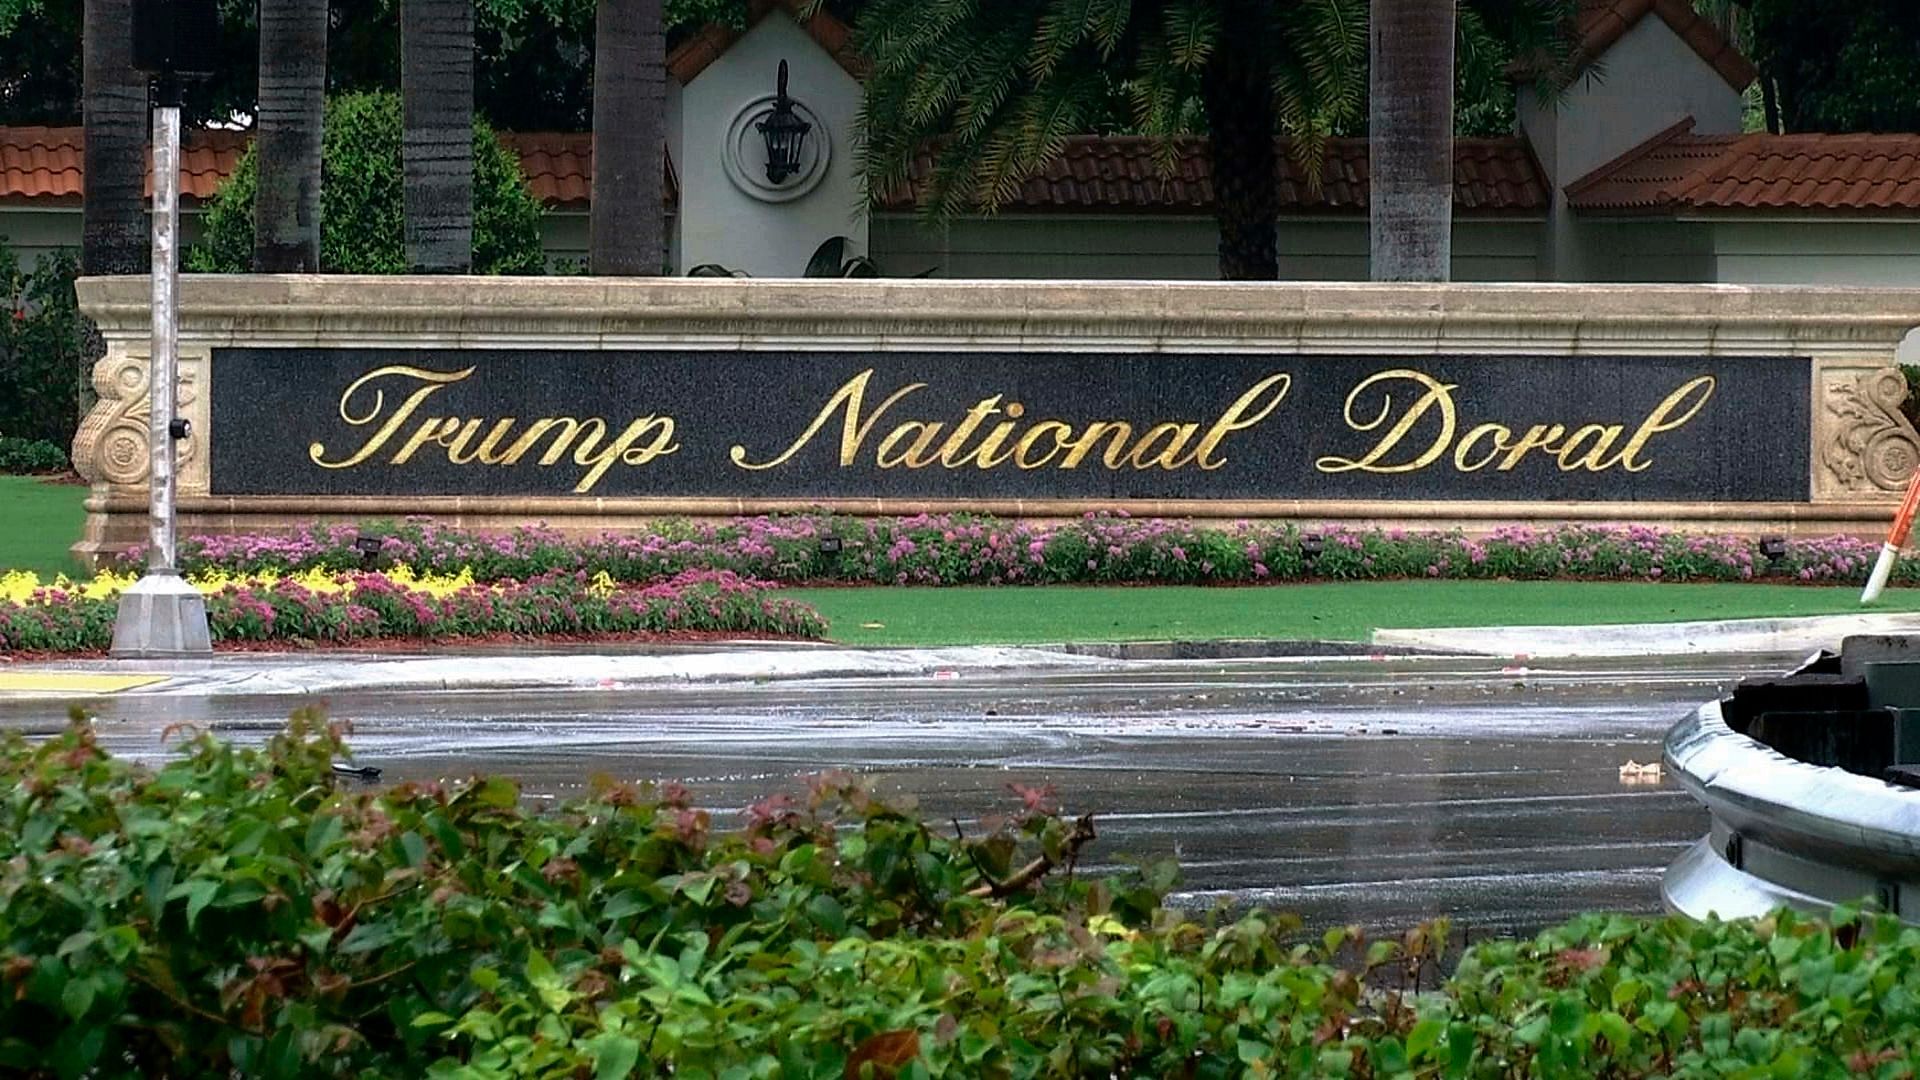 This  2017 file frame from video shows the Trump National Doral in Doral, Florida. The White House says it has chosen President Donald Trump’s golf resort in Miami as the site for next year’s Group of Seven summit.